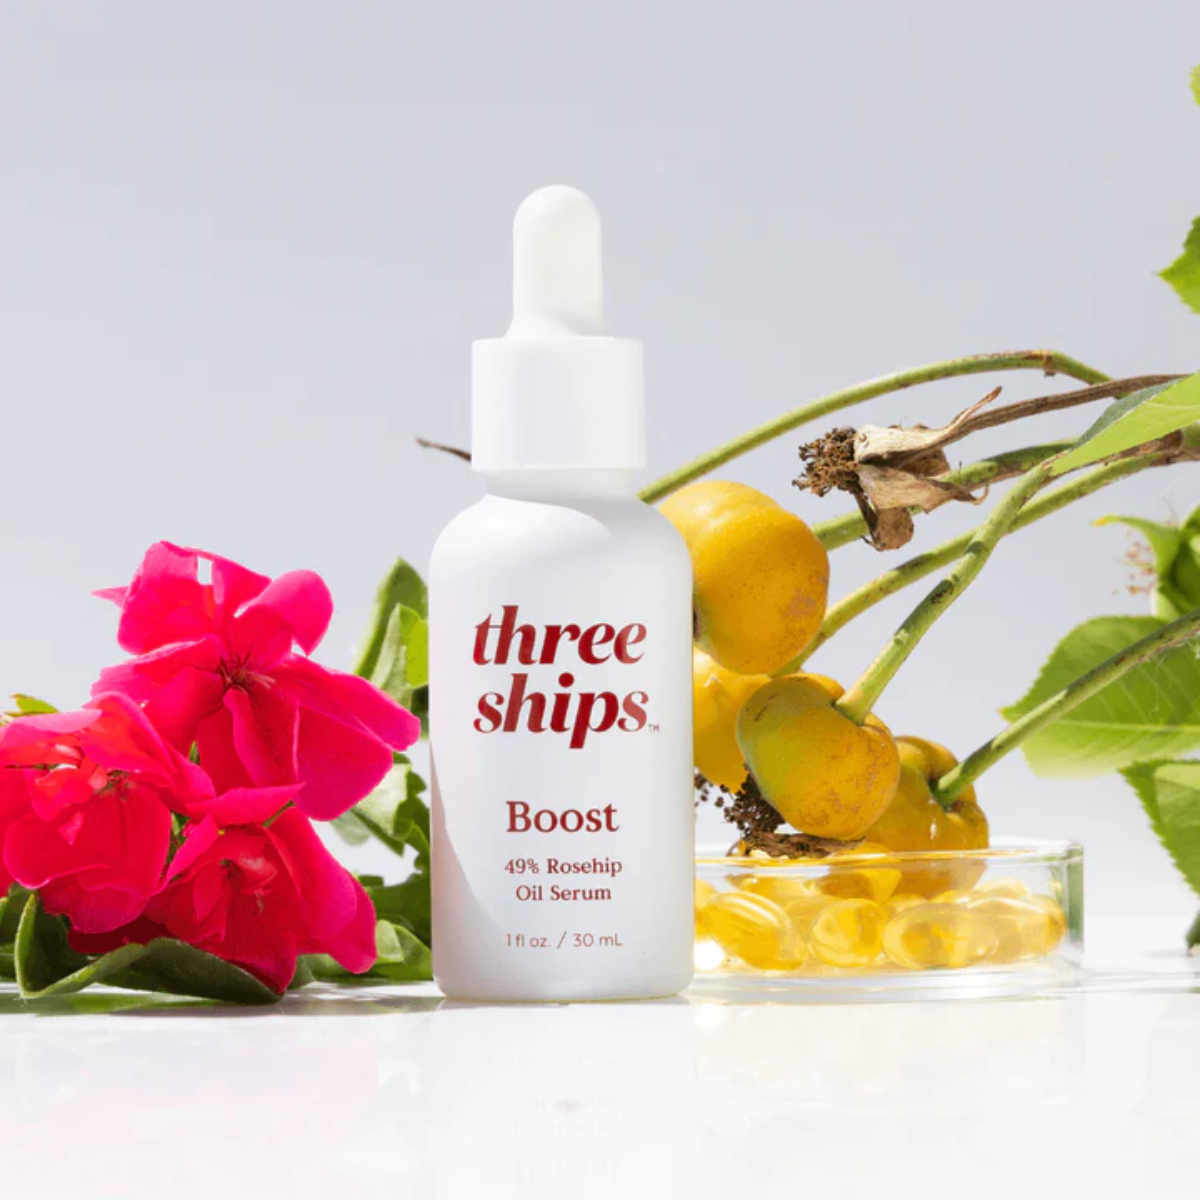 Three Ships Boost Rosehip Face Oil Kit